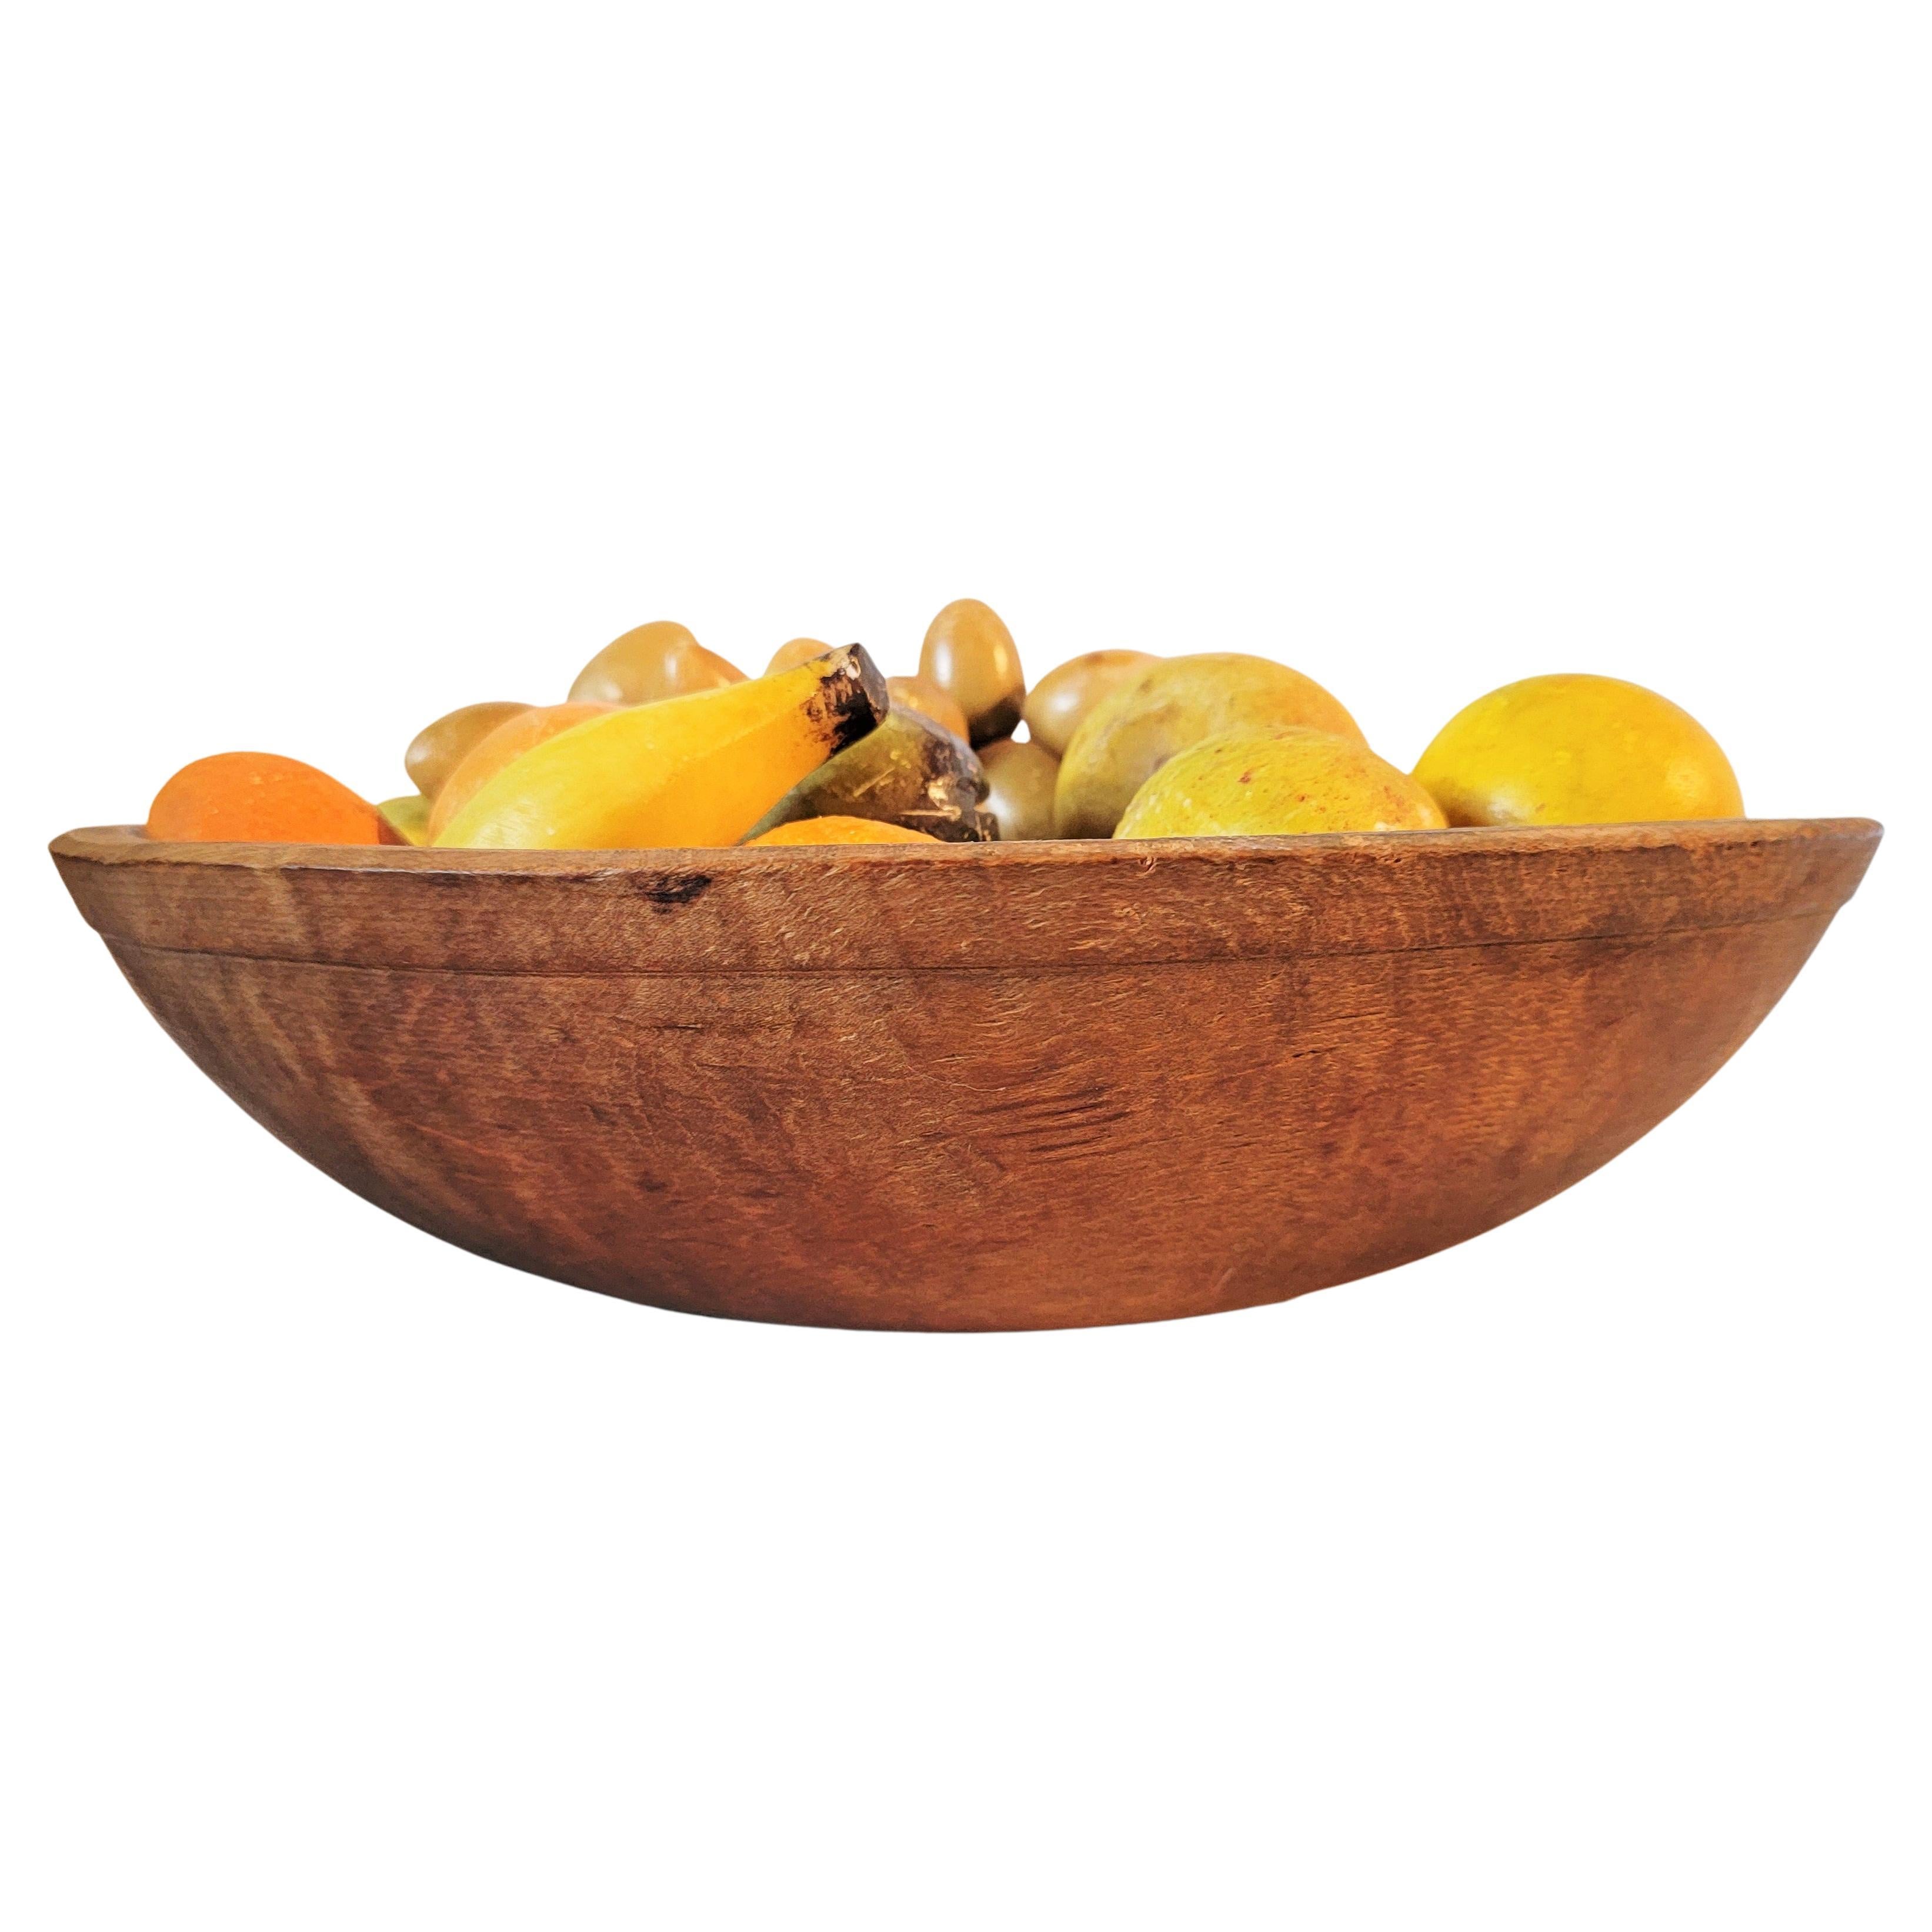 19th C Wood bowl filled with an amazing collection of stone fruit from Italy. There are many different varieties of stone fruit. Selling as a complete collection.

Measurements are approximate. 
14wide x 15deep x 4.25 high.